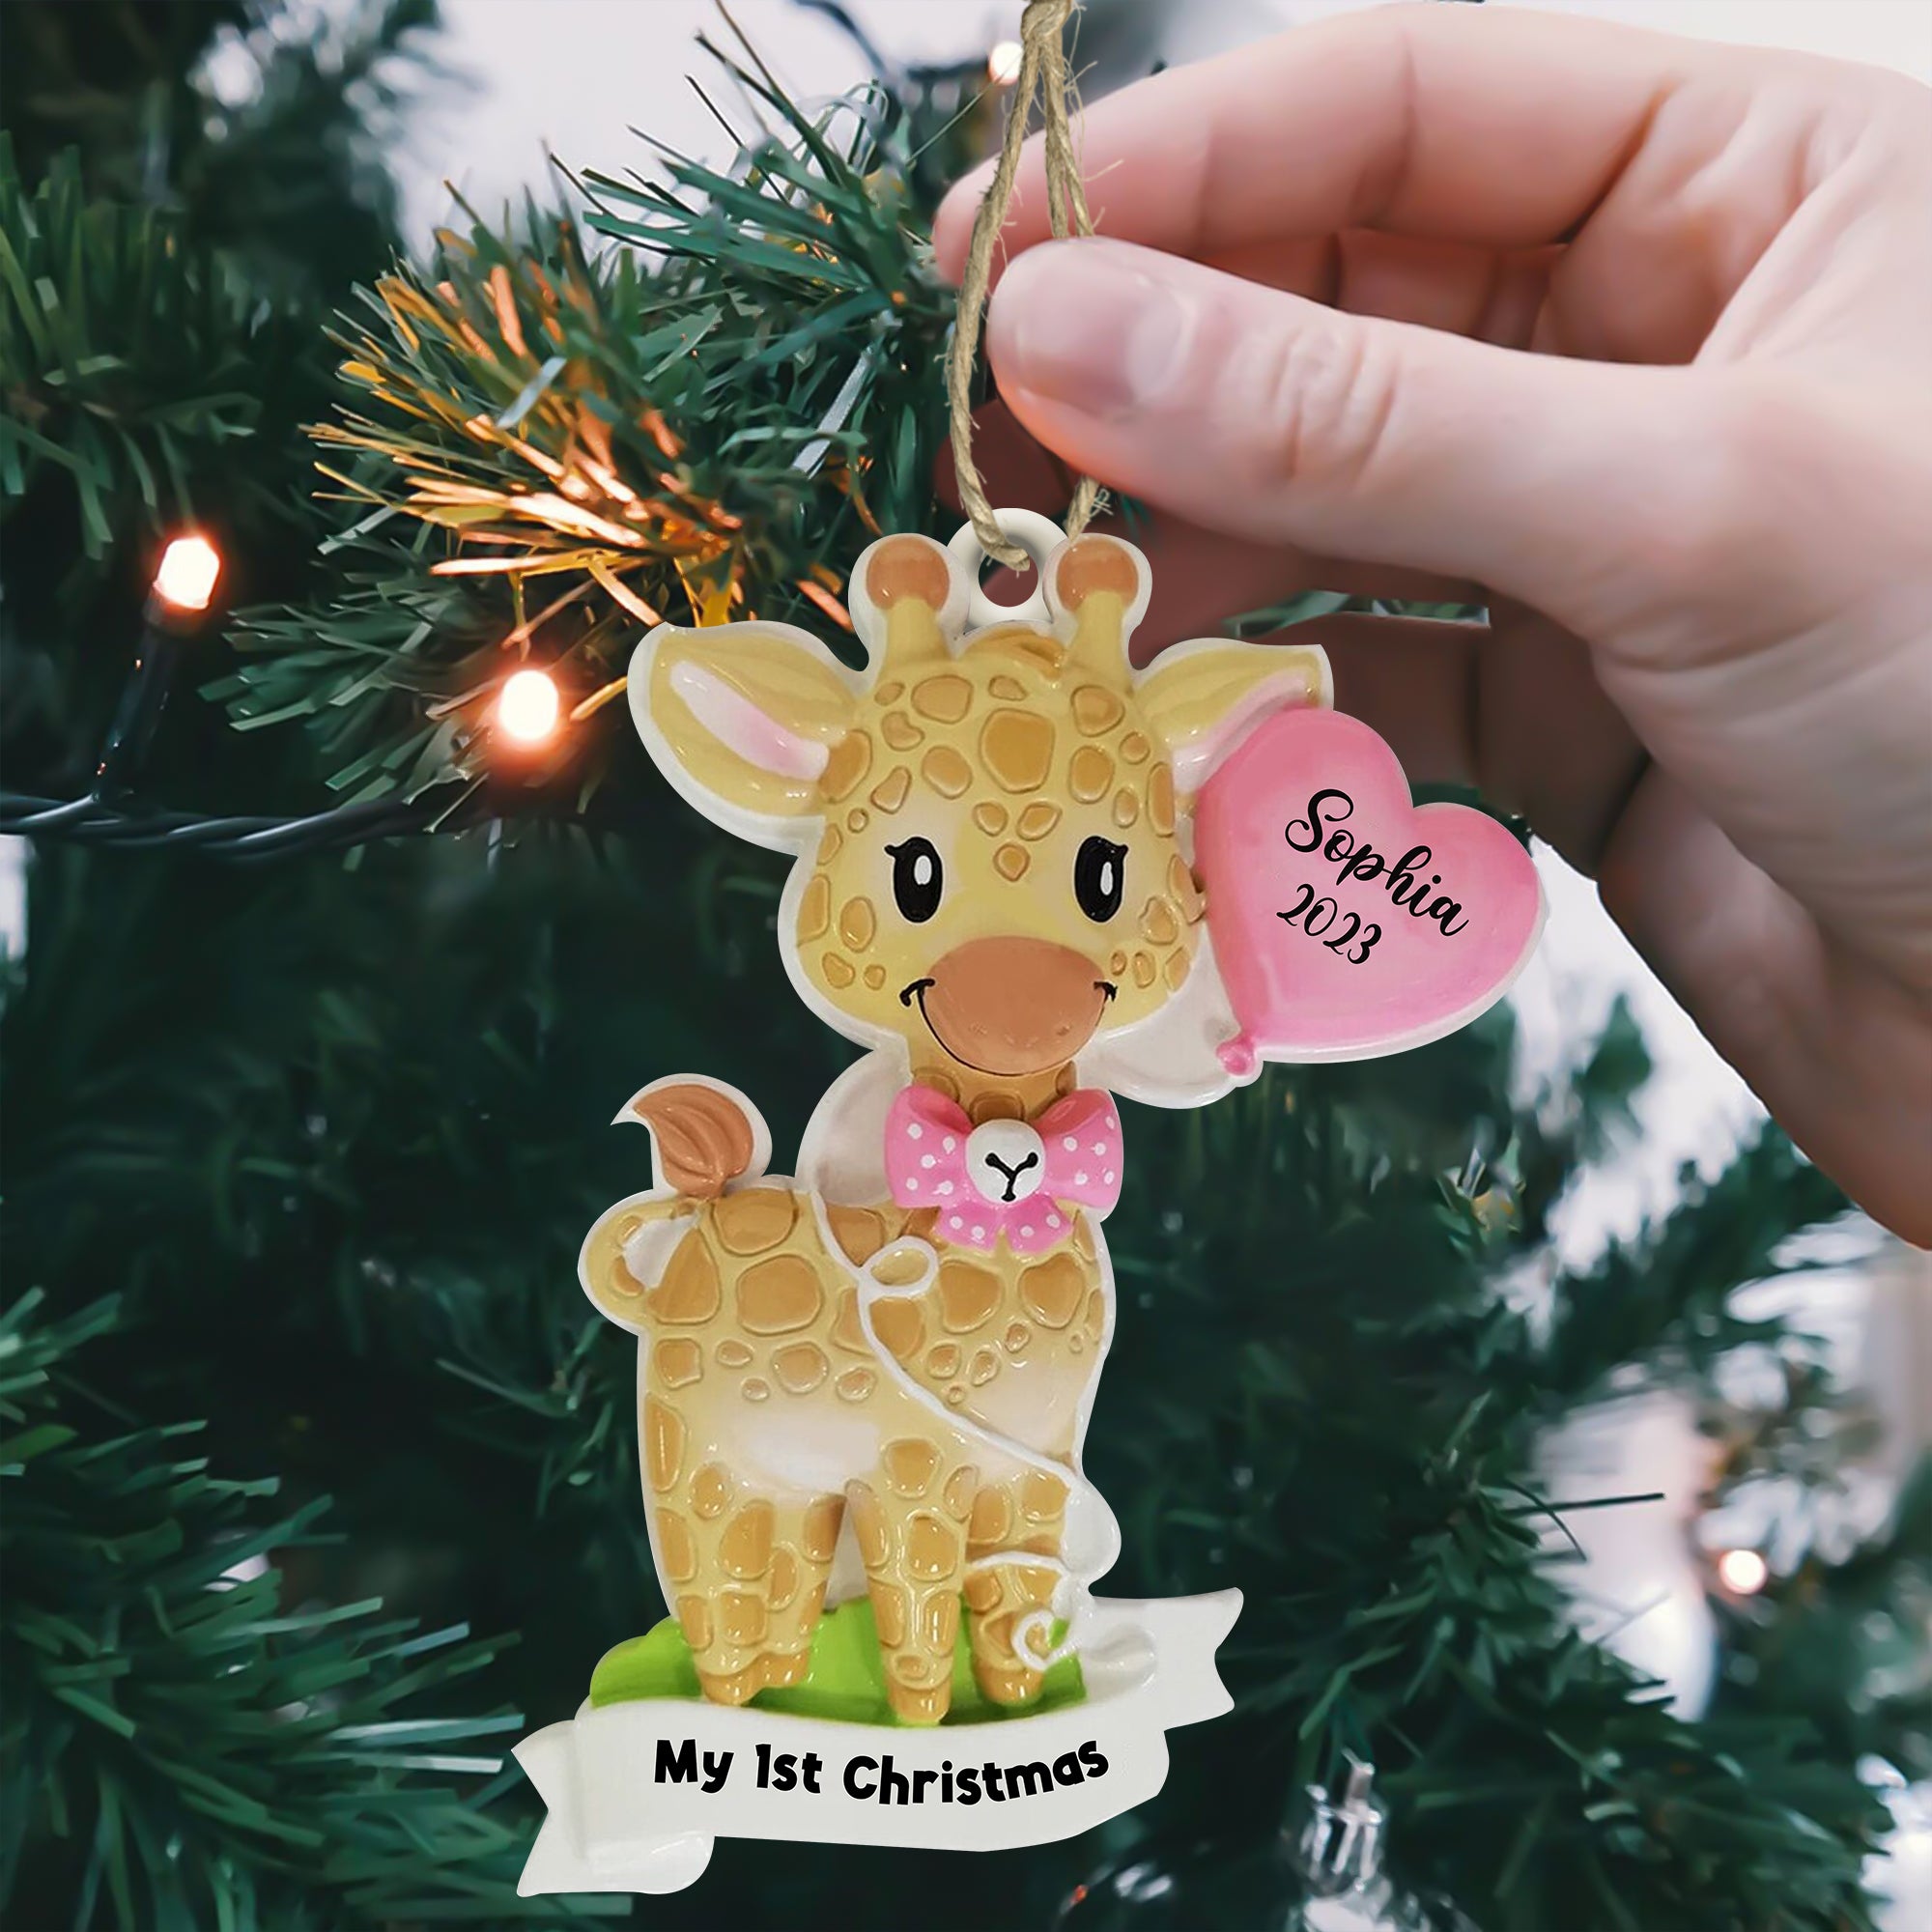 Baby Deer First Christmas Kid , Custom Appearance And Name- Personalized Ceramic Ornament - Gift For Christmas, Gift For Family